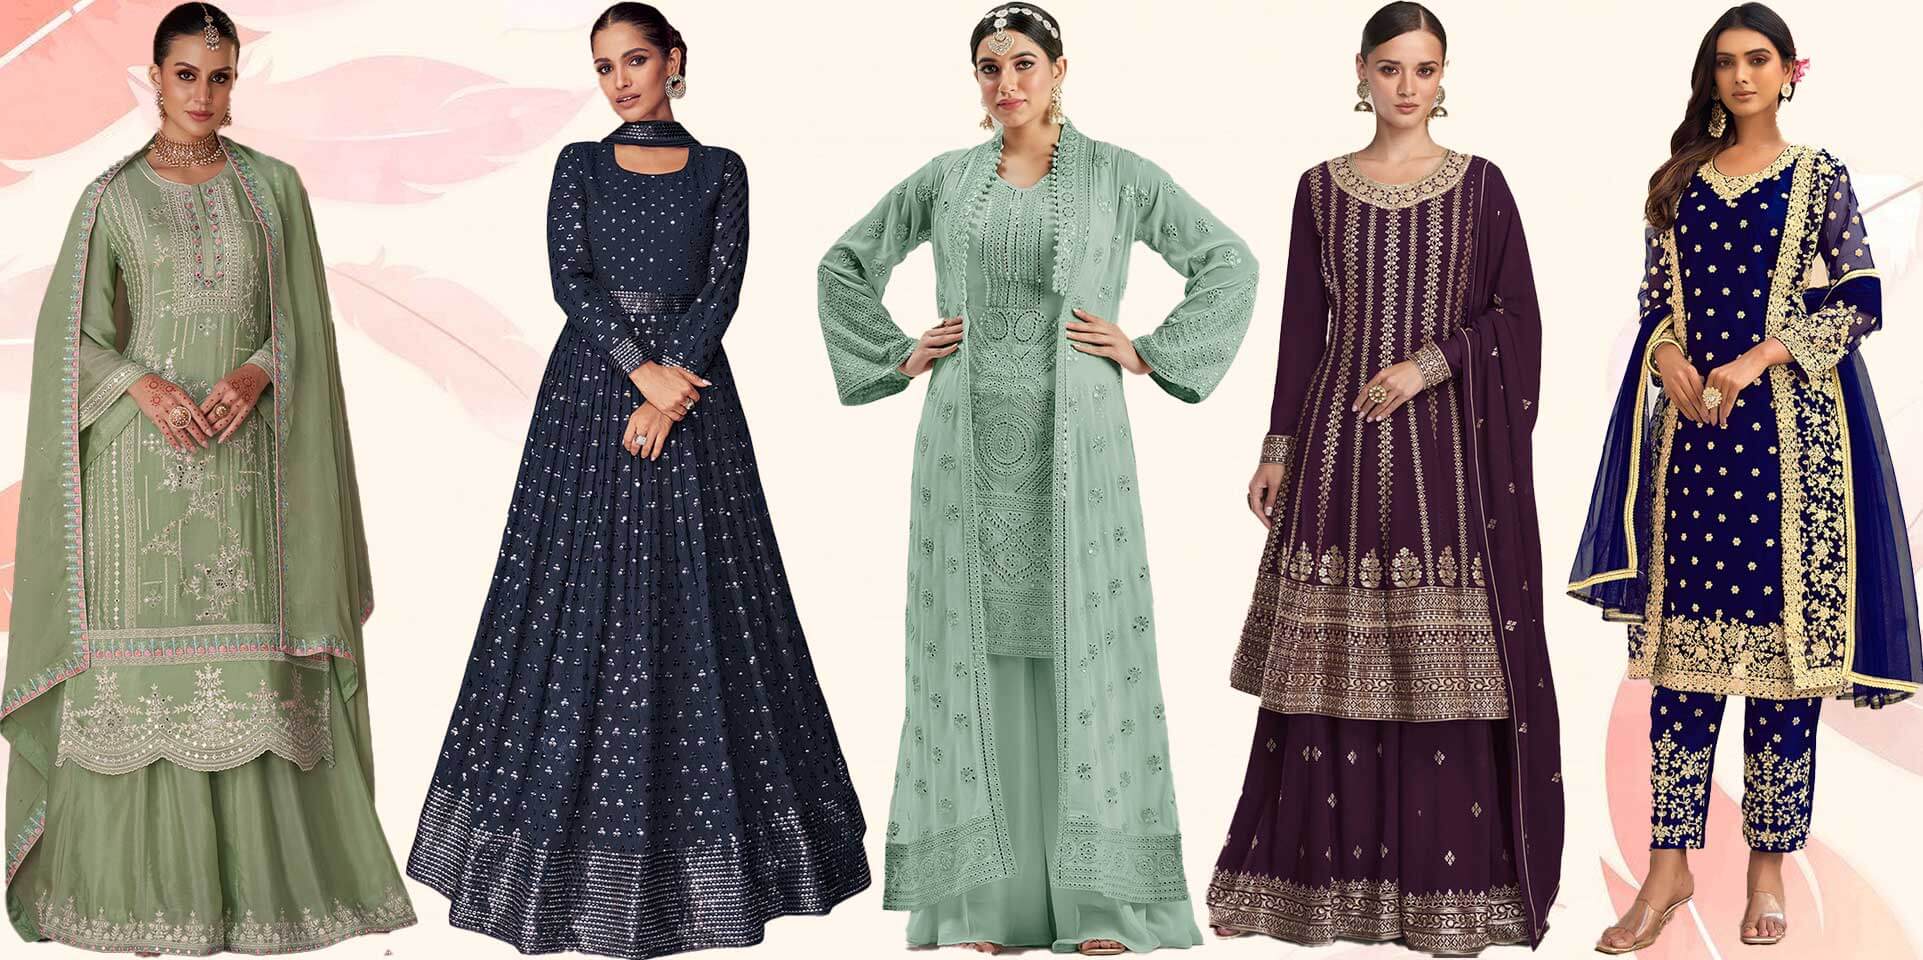 5 ideas to get perfect wow compliments on salwar suit and kameez.